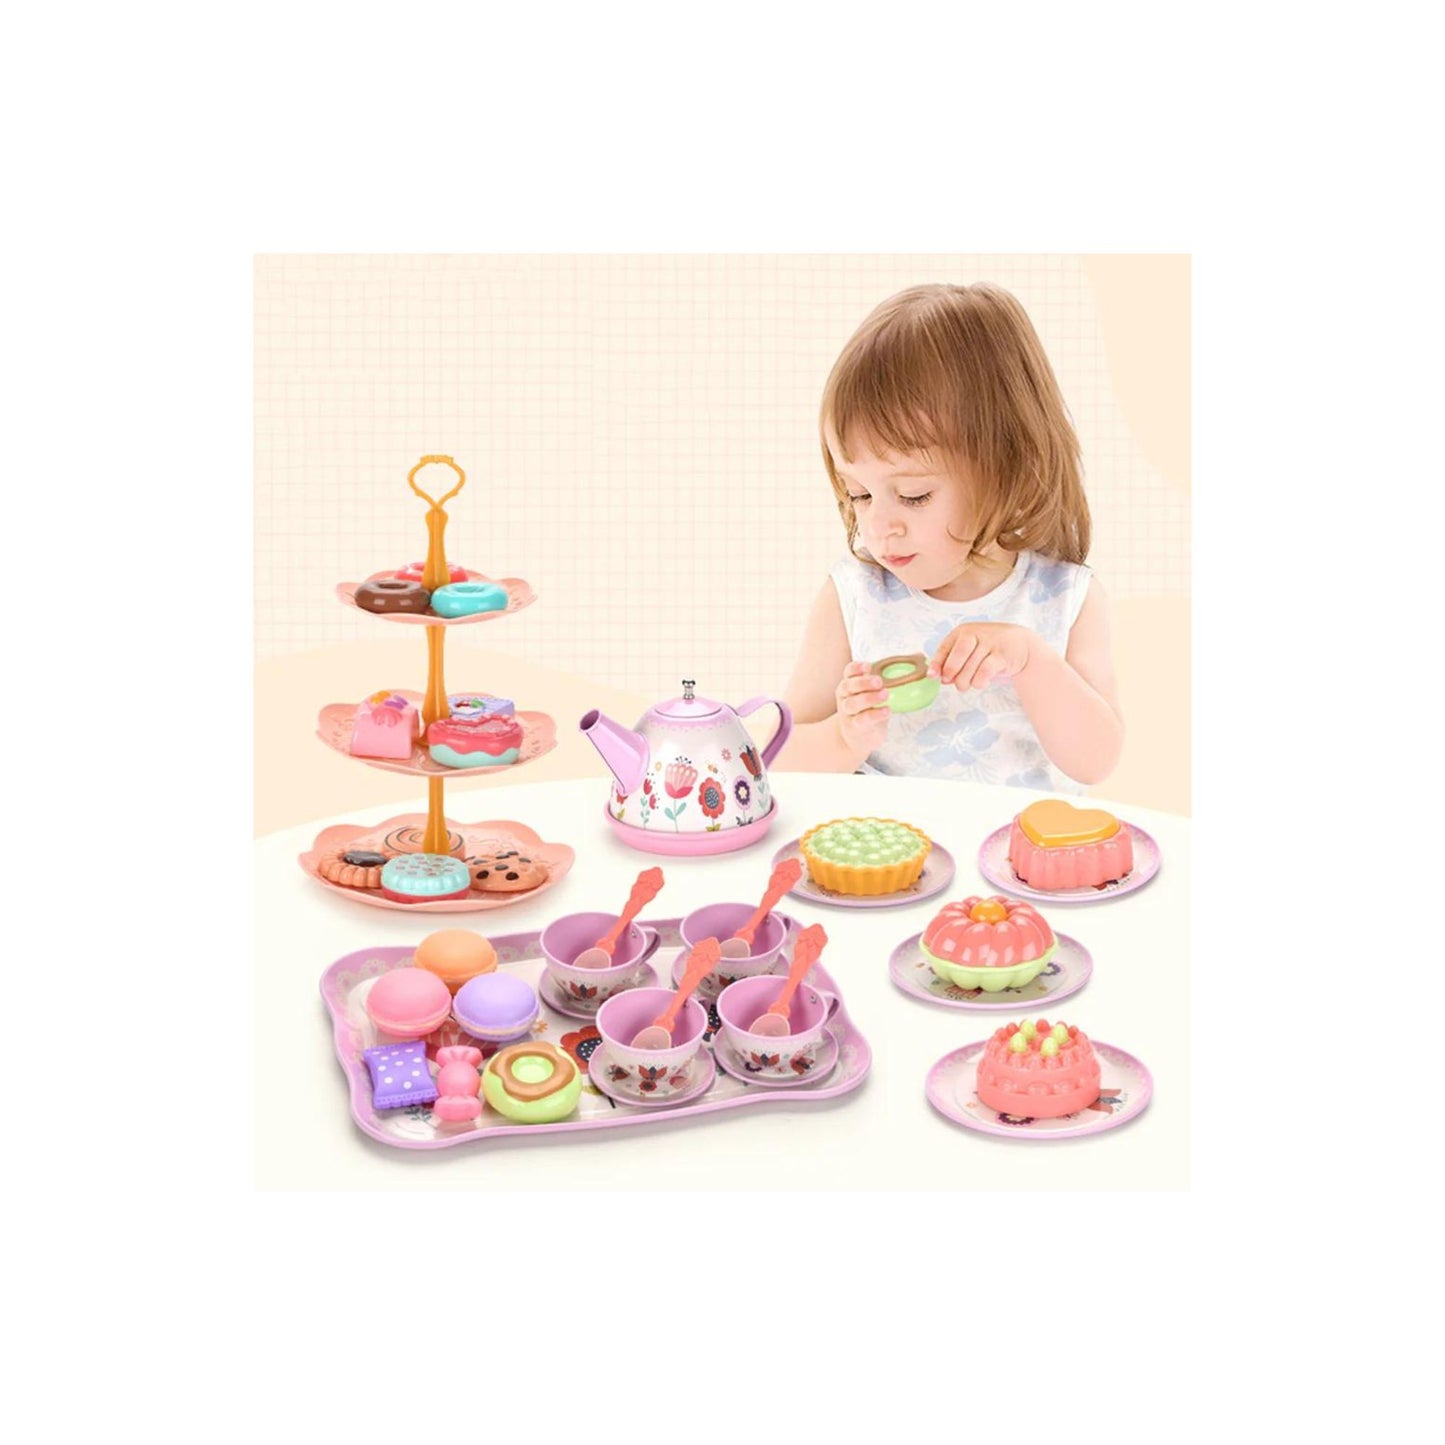 Little Fat Hugs Afternoon Tea Set Floral Toys I Inspires Endless Creative Thinking, Non-toxic, Durable, Easy to Carry, and Development Child’s Creative Social Skills